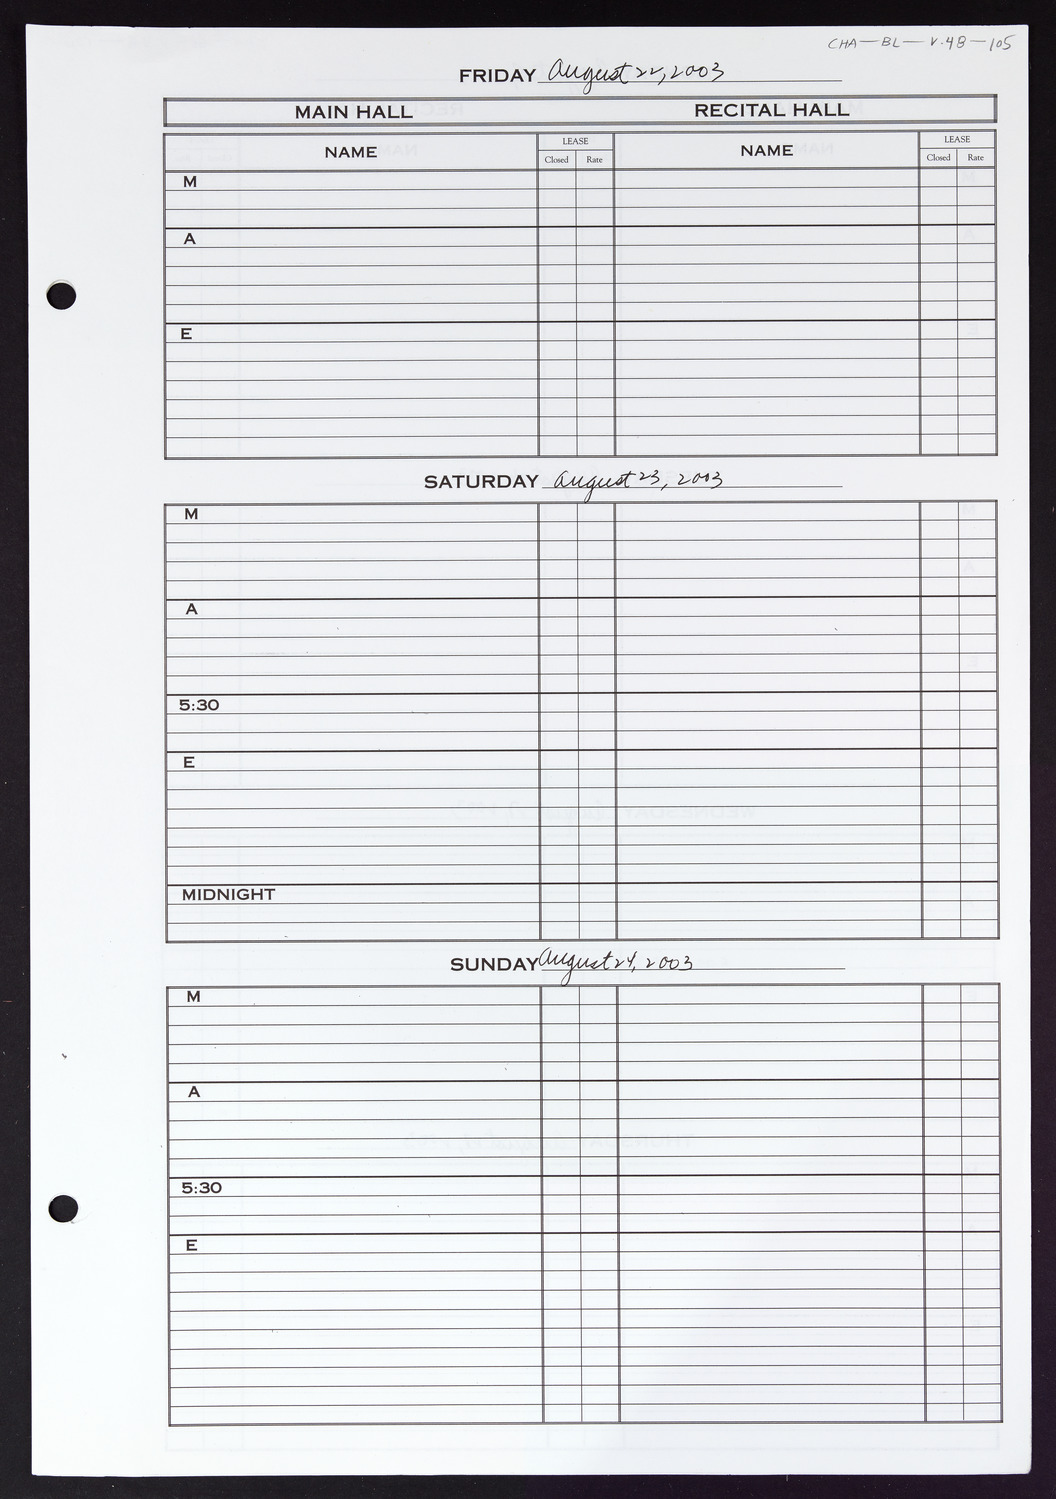 Carnegie Hall Booking Ledger, volume 48, page 105